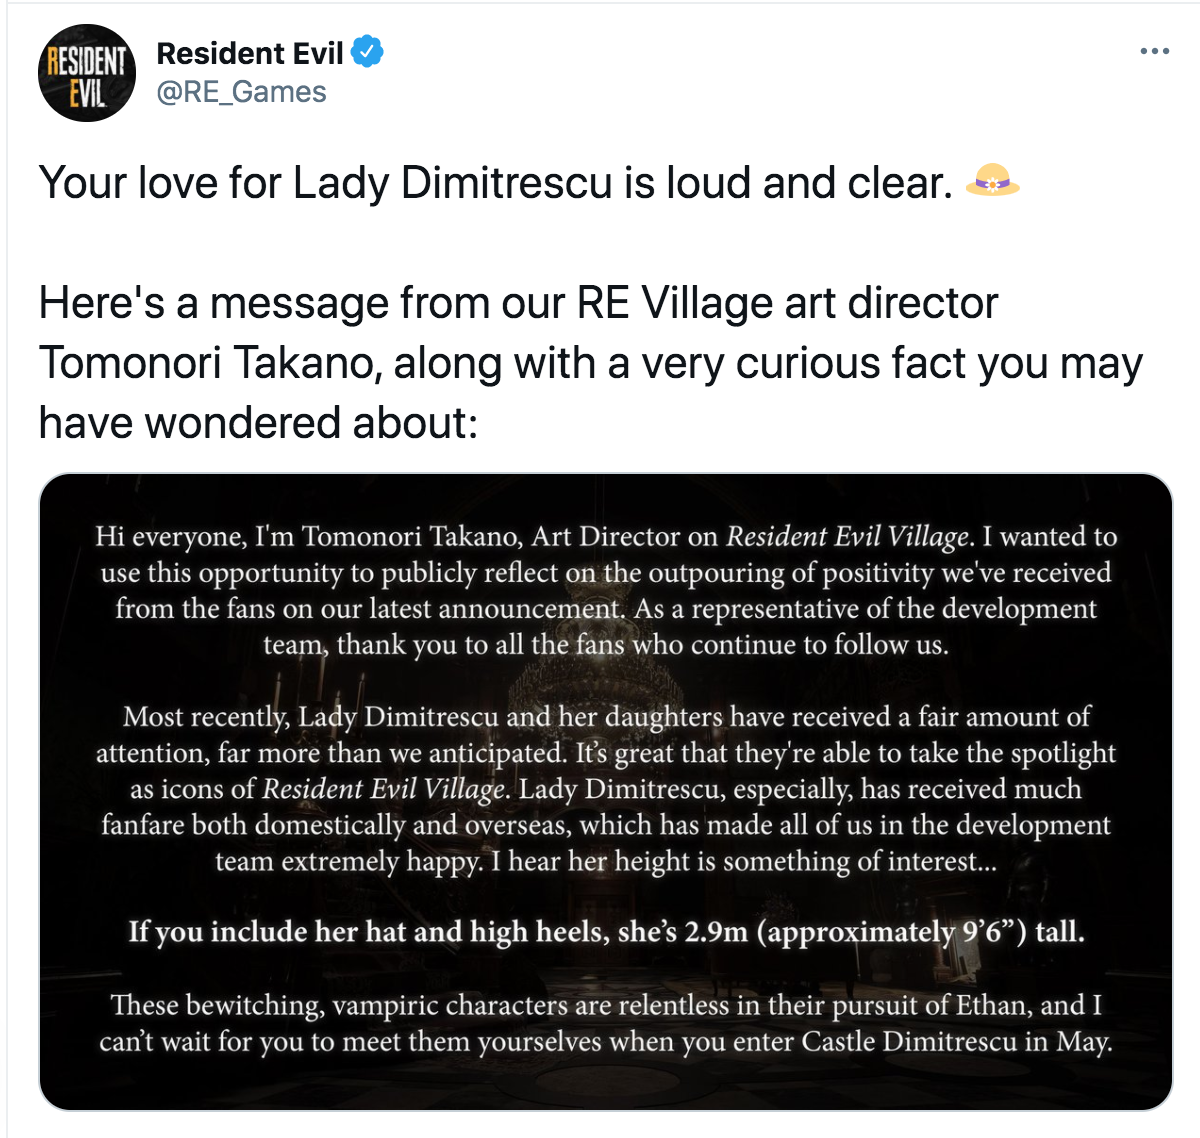 Lady Dimitrescu 9 foot 6 - Resident Resident Evil Evil Your love for Lady Dimitrescu is loud and clear. Here's a message from our Re Village art director Tomonori Takano, along with a very curious fact you may have wondered about Hi everyone, I'm Tomono